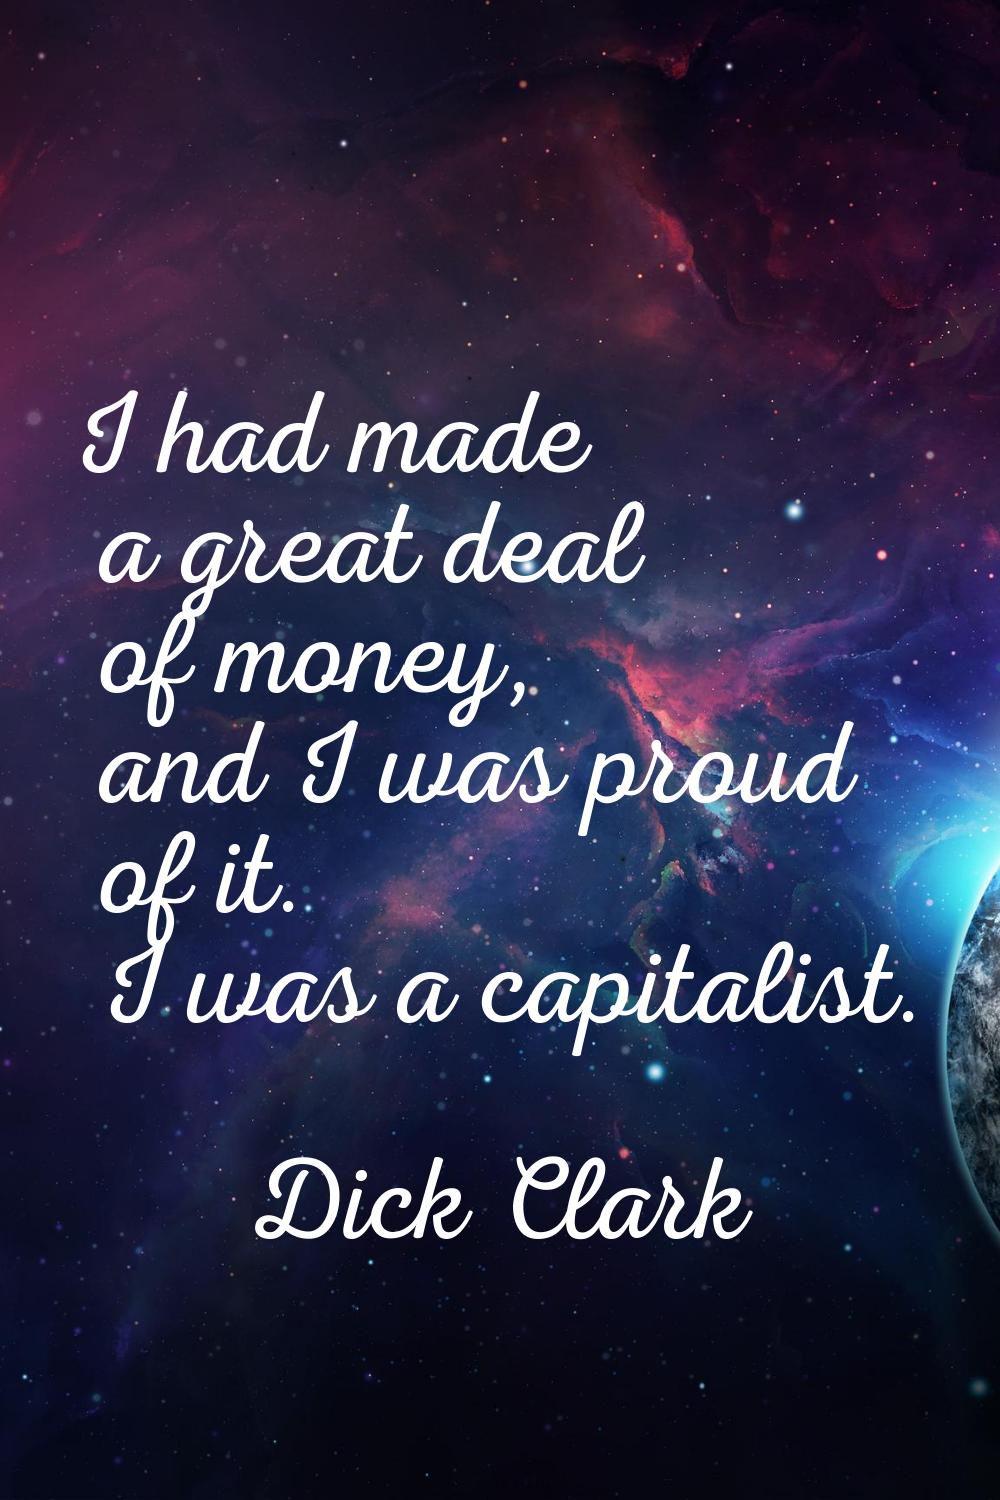 I had made a great deal of money, and I was proud of it. I was a capitalist.